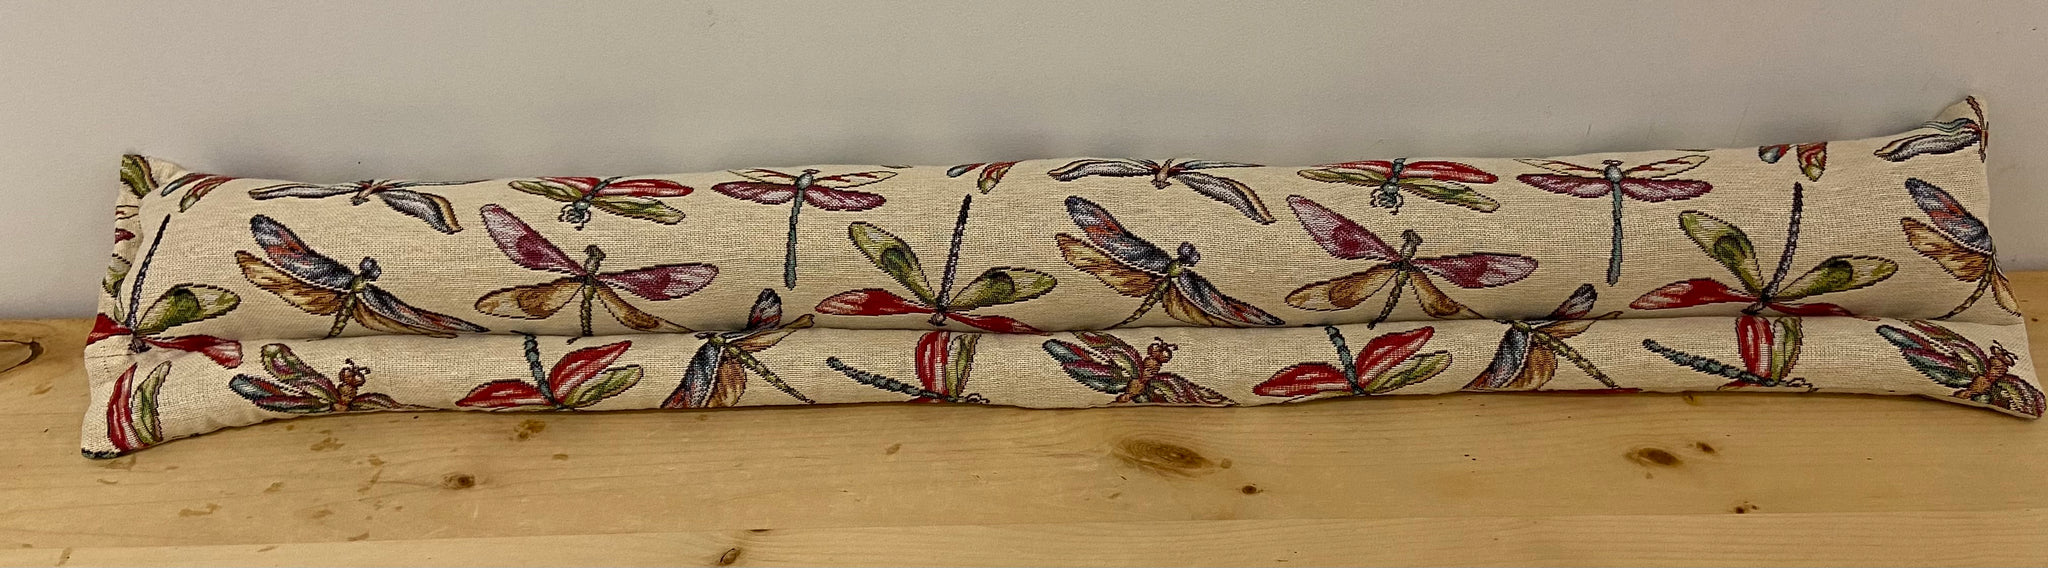 Dragonfly Tapestry Draught Excluder